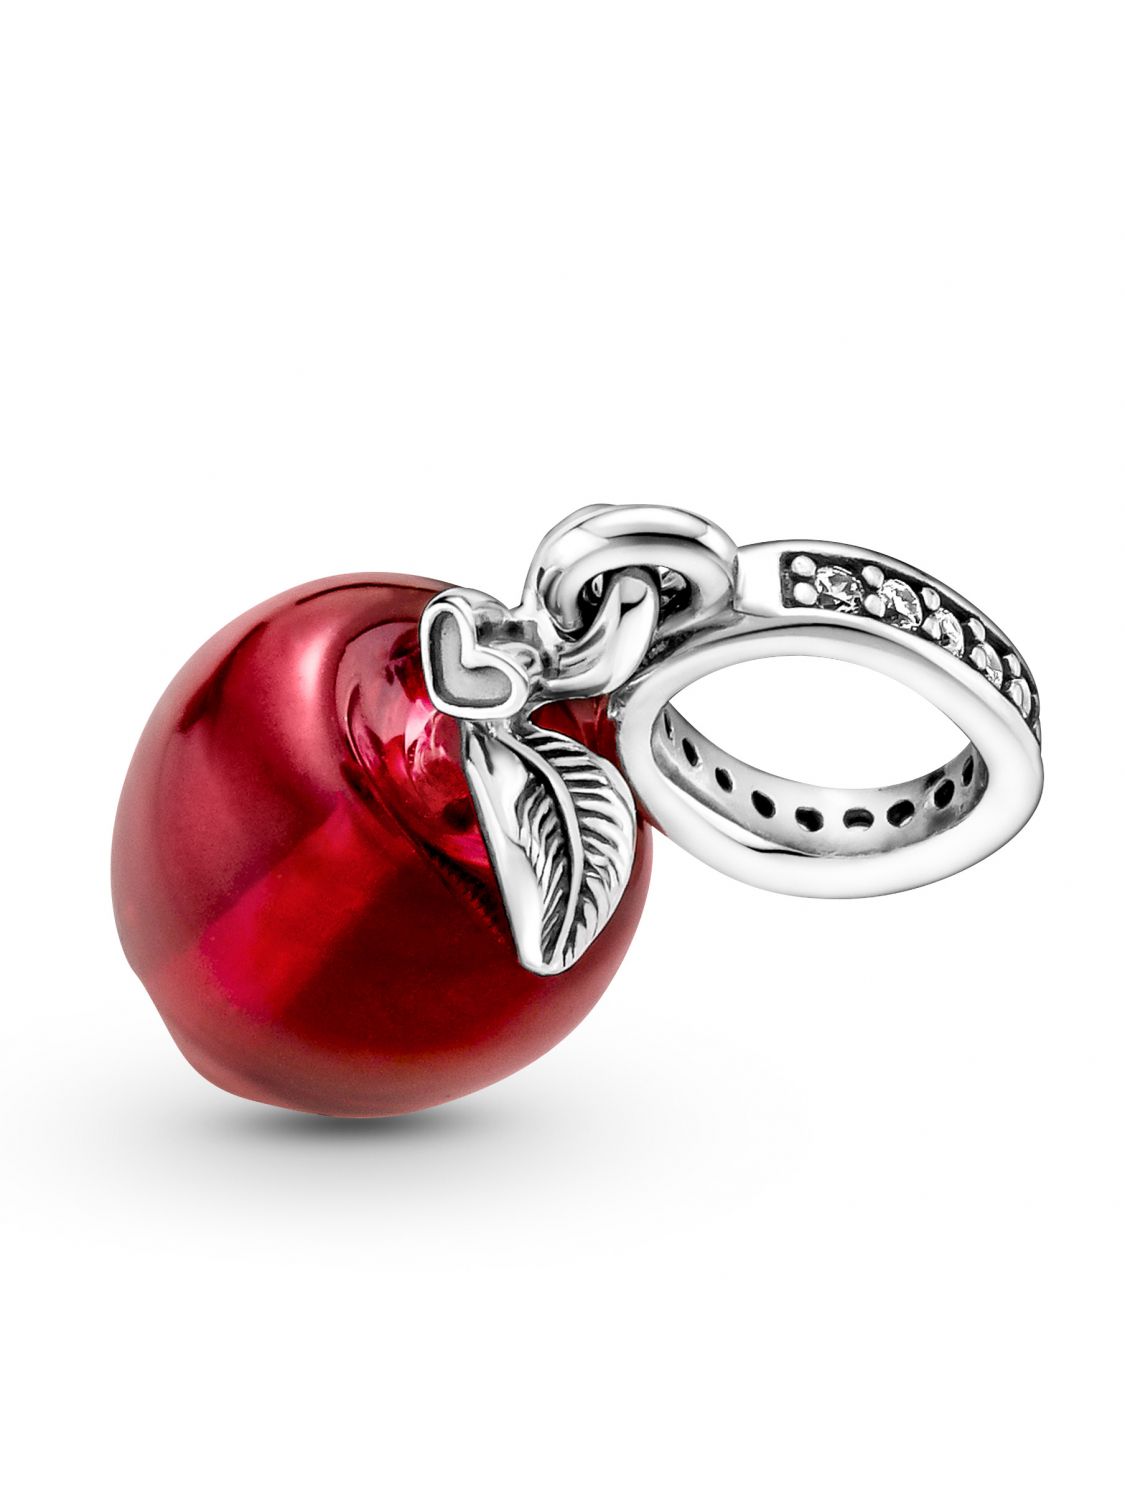 Best Birthday Gift Sterling Silver Enameled Red Apple Charm